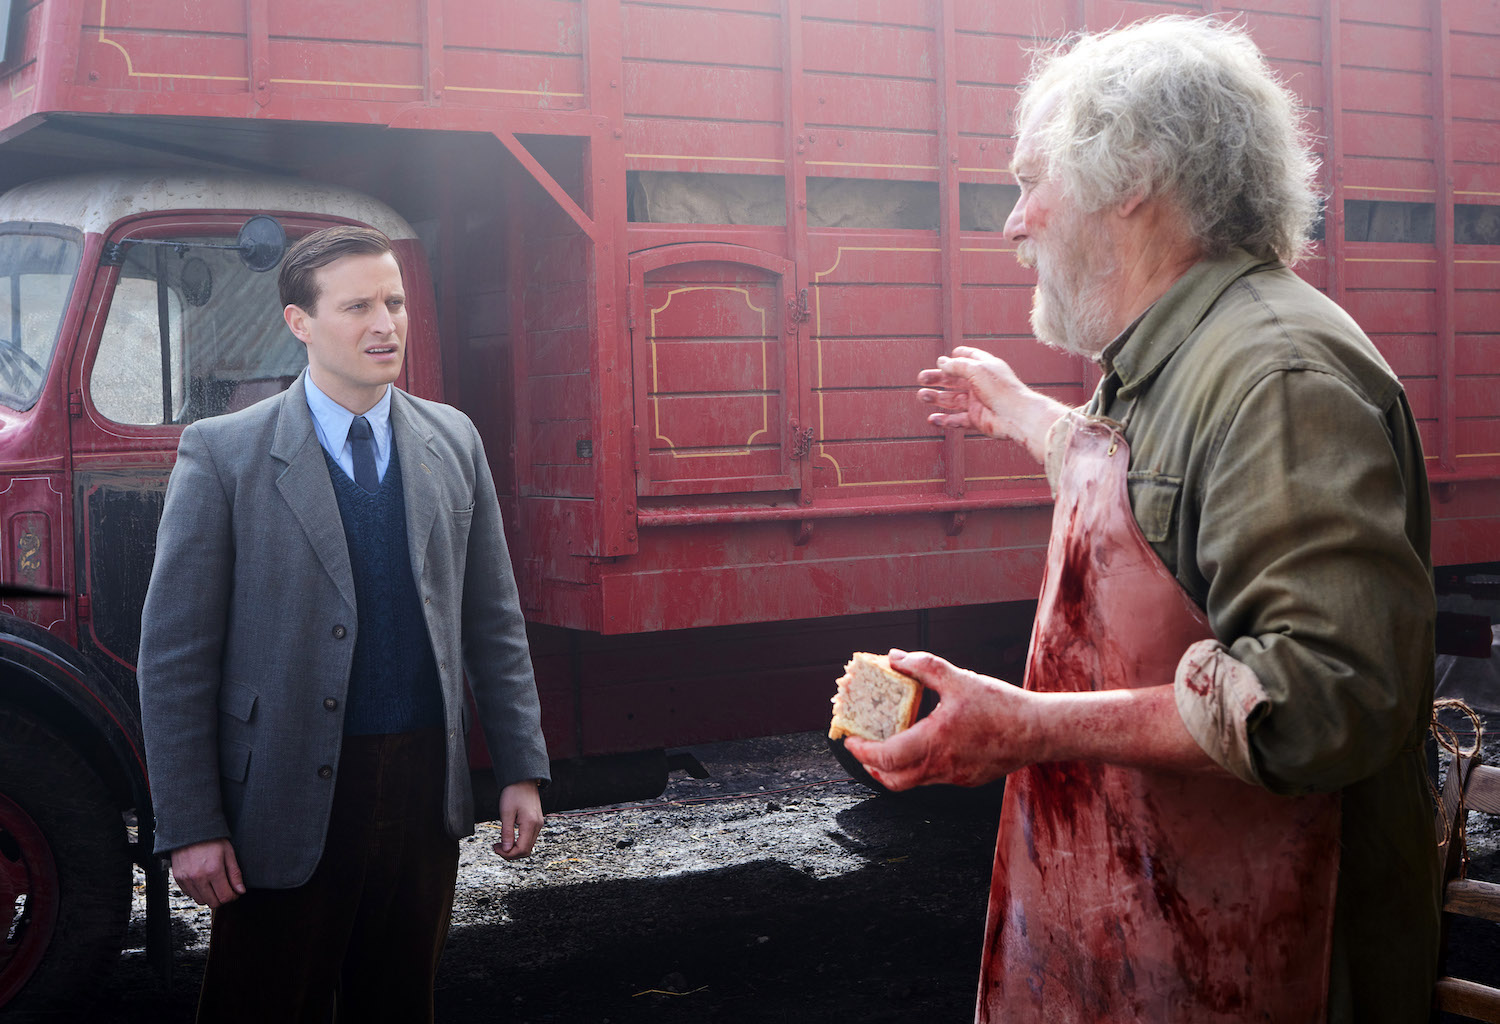 Picture shows: James Herriot (Nicholas Ralph) confronts Jeff Mallock (Jim Moir) about the cow. James is standing in front of Jeff's red truck, inside which the cow is still alive. Jeff, covered as usual in dried blood and other nasty substances, is eating a pork pie which he holds in his left hand.